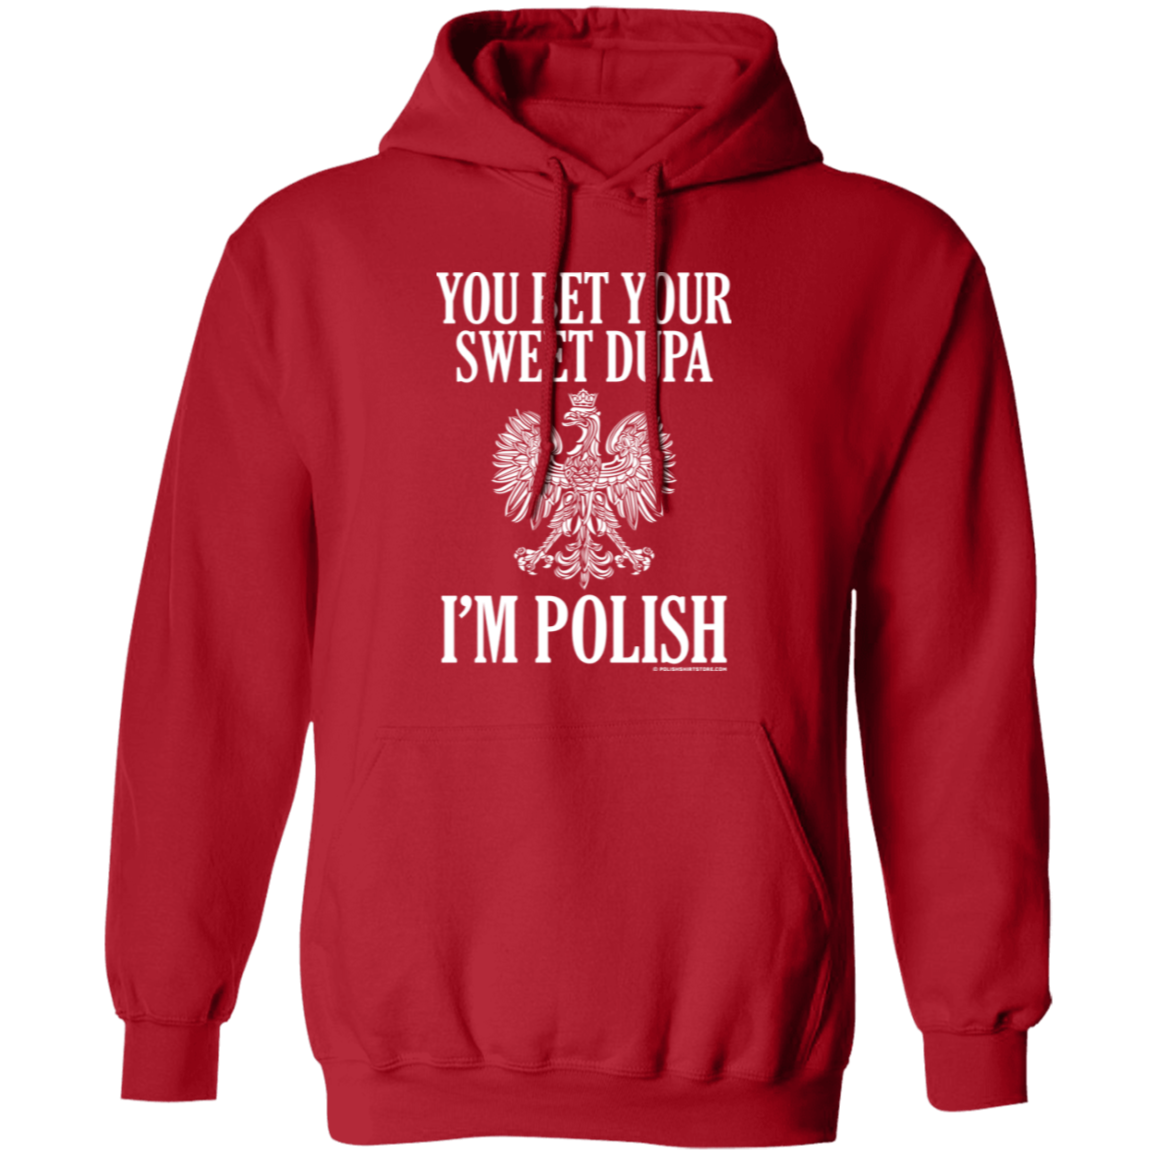 You Bet Your Sweet Dupa I'm Polish Apparel CustomCat G185 Pullover Hoodie Red S